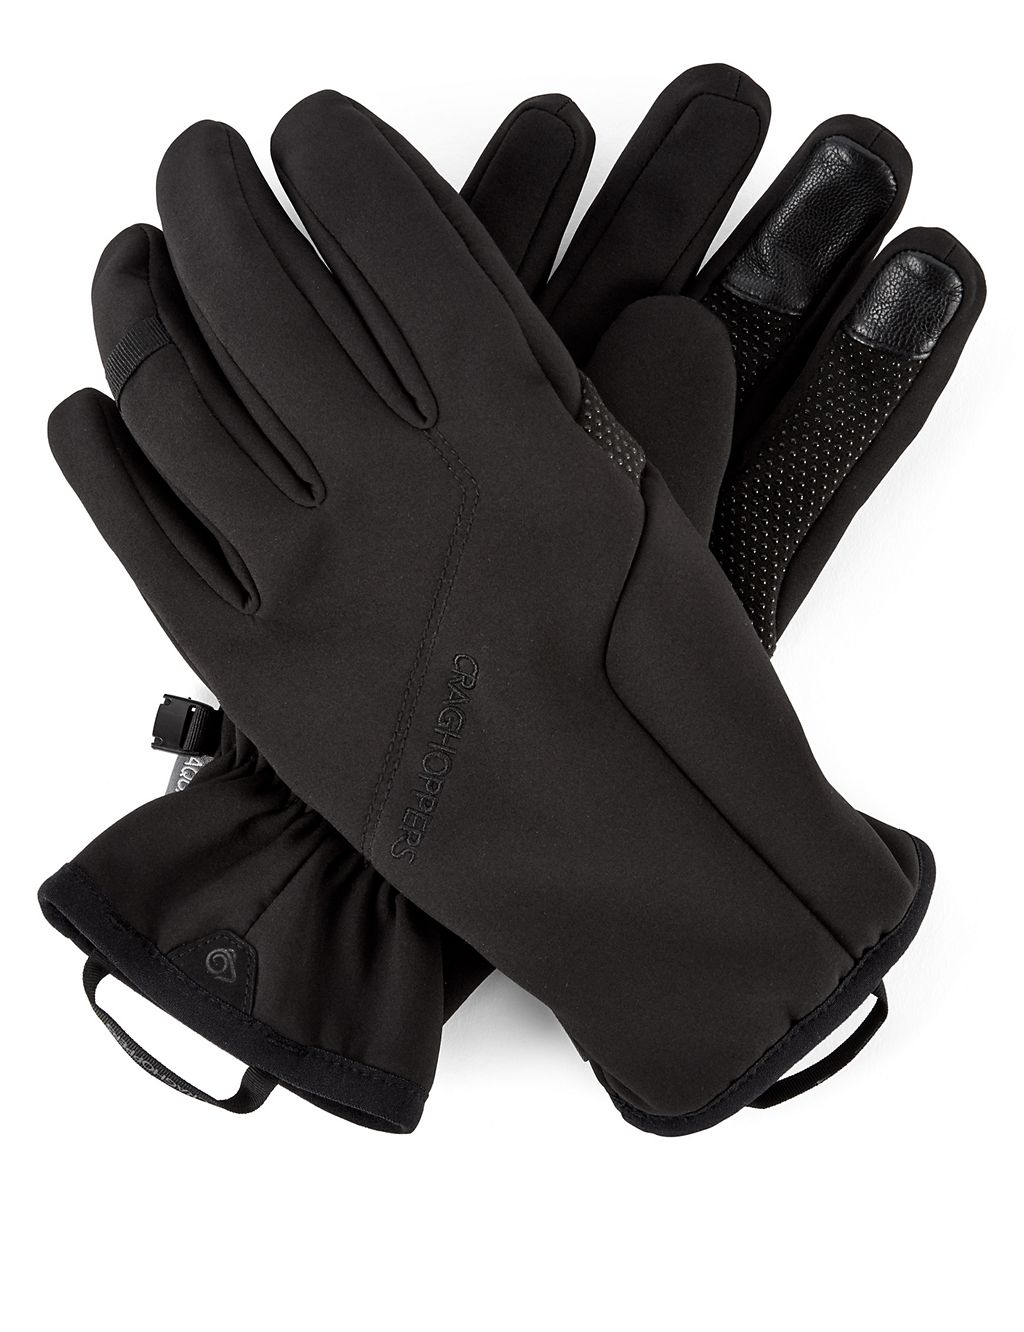 Thermal Gloves 1 of 1